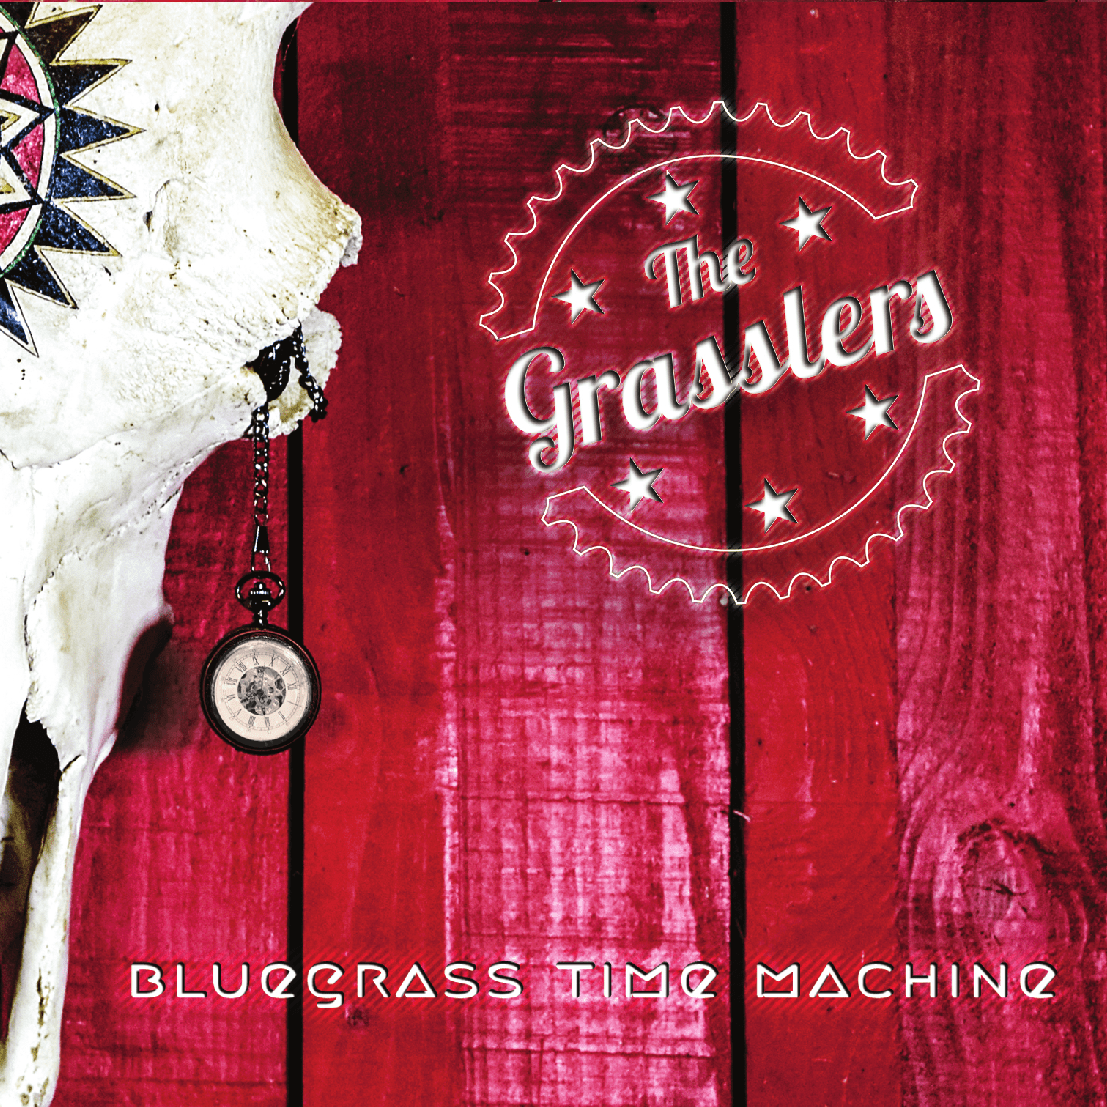 The Grasslers